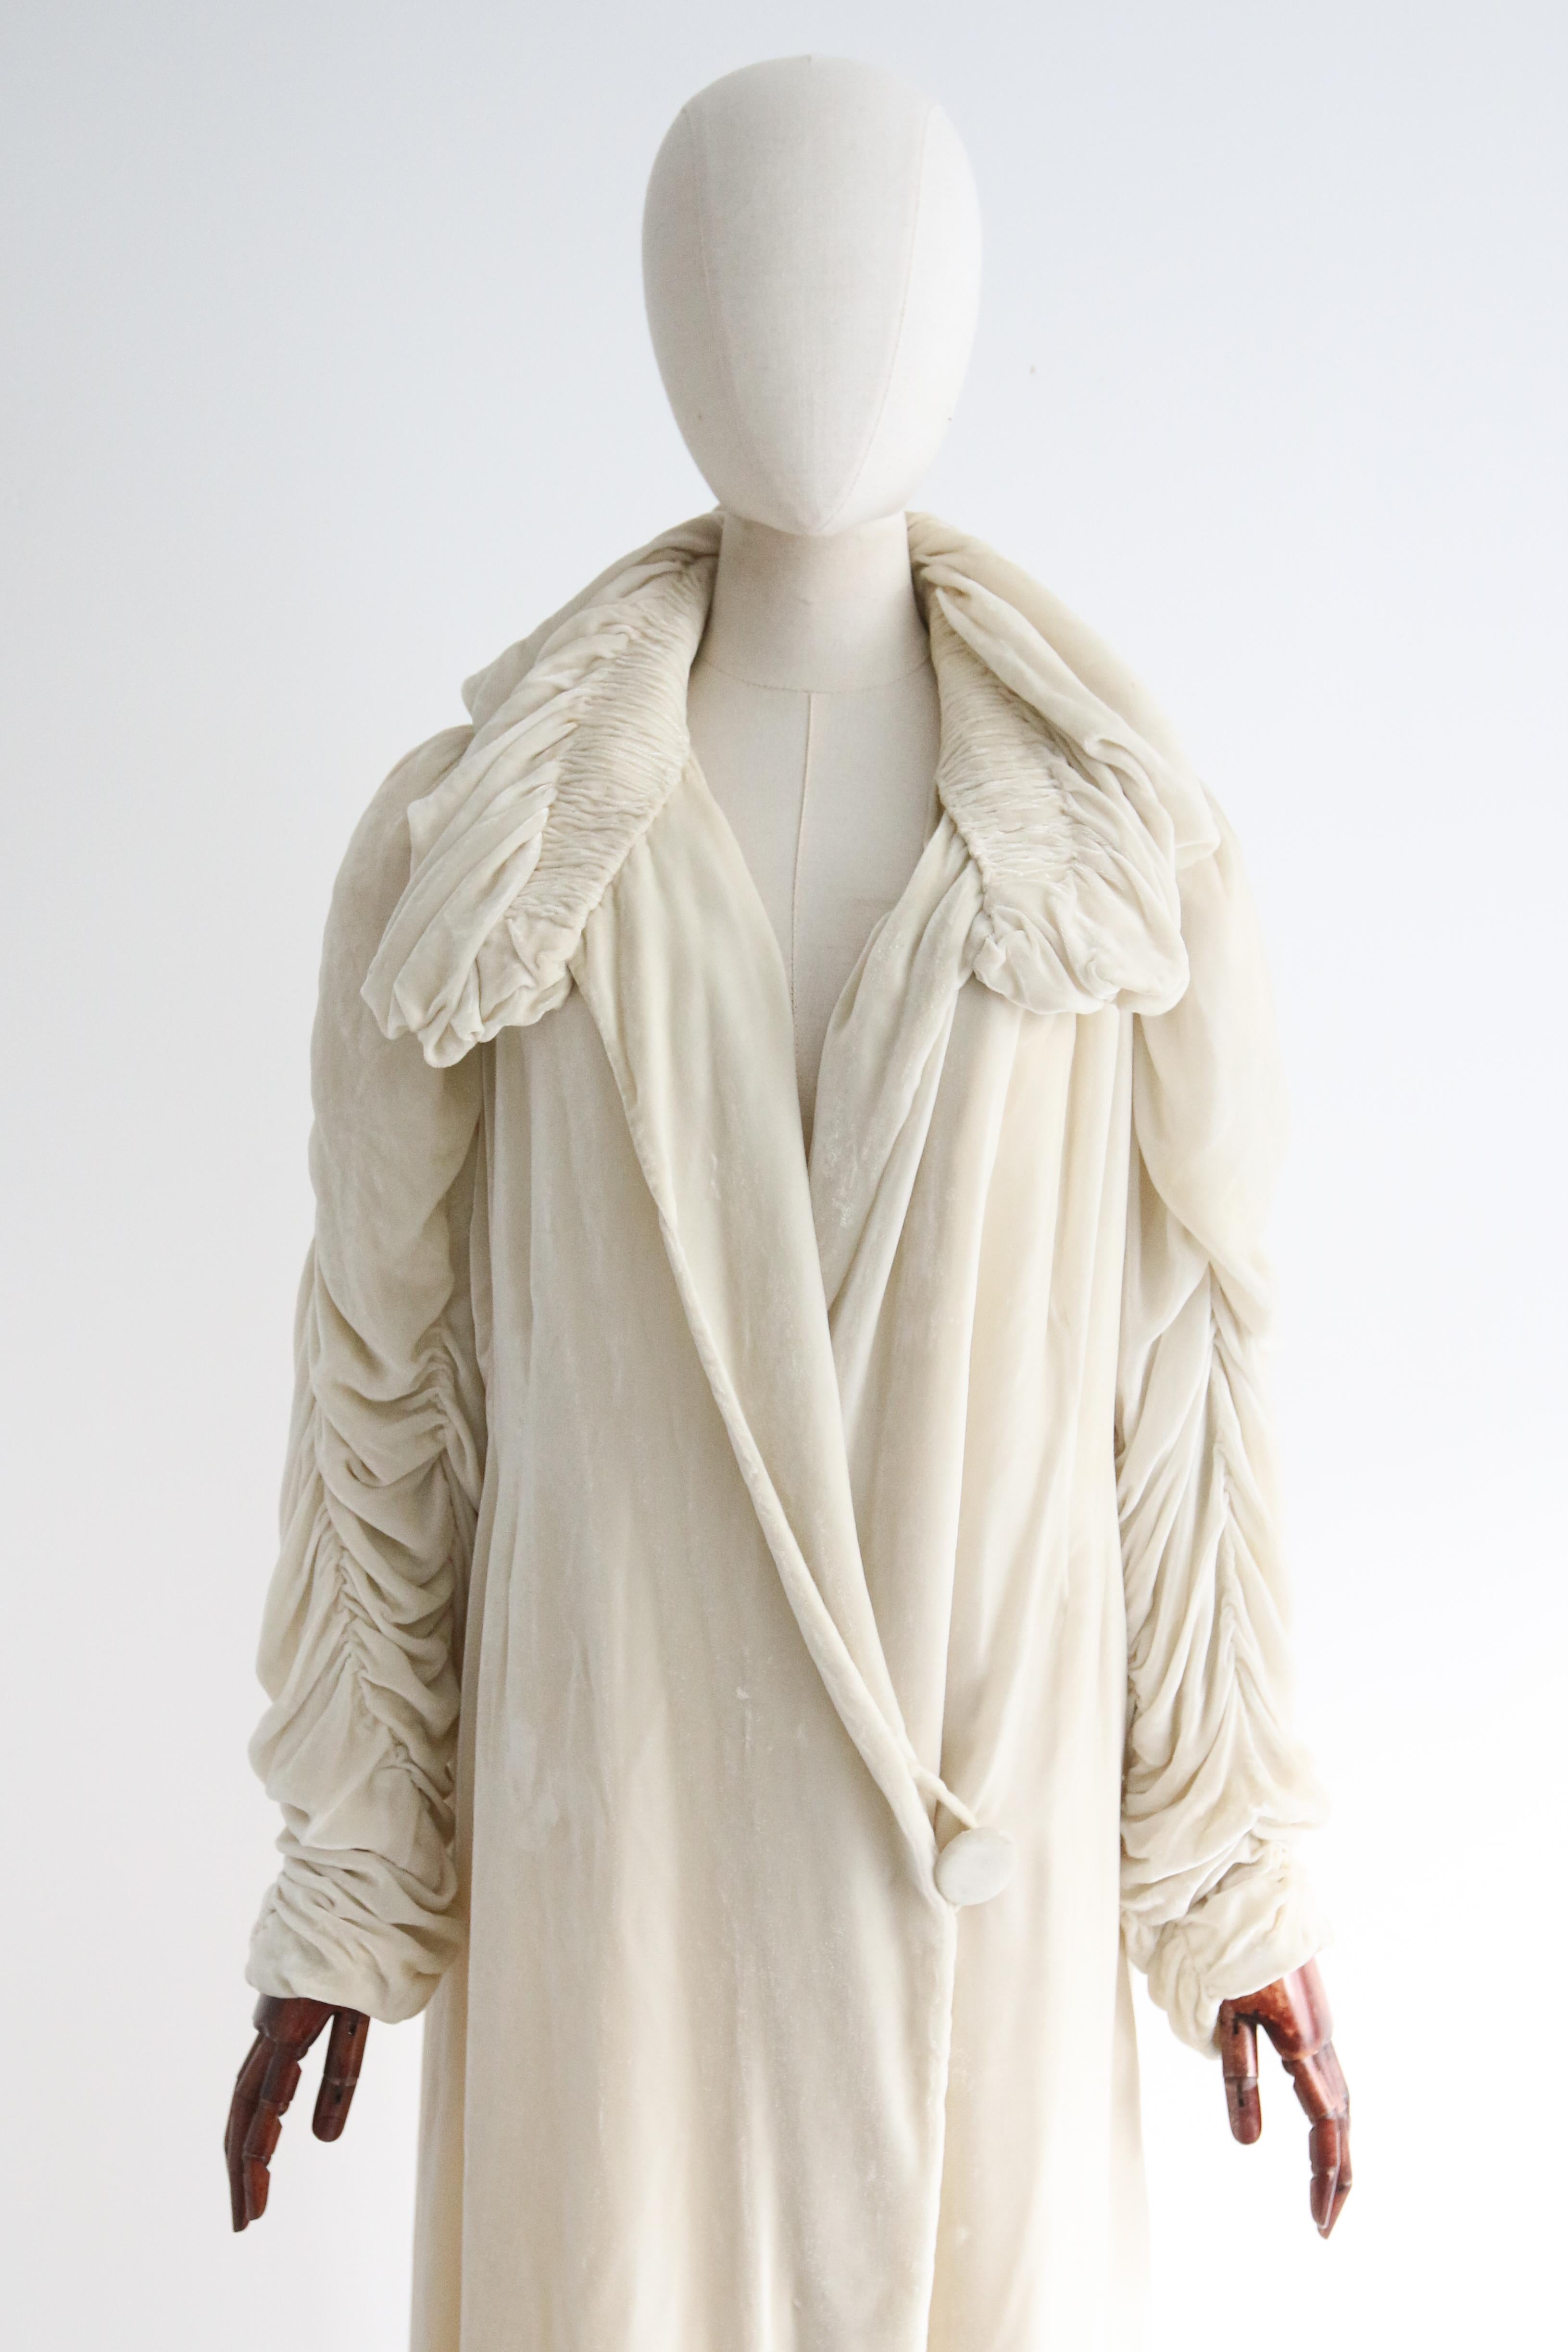 This truly majestic 1920's silk coat, rendered in the most sumptuous shade of ivory silk velvet and lined in the softest silk, is a rare piece to behold.
The deep V shaped neckline of the coat is framed by a pleated and gathered ruffled collar,